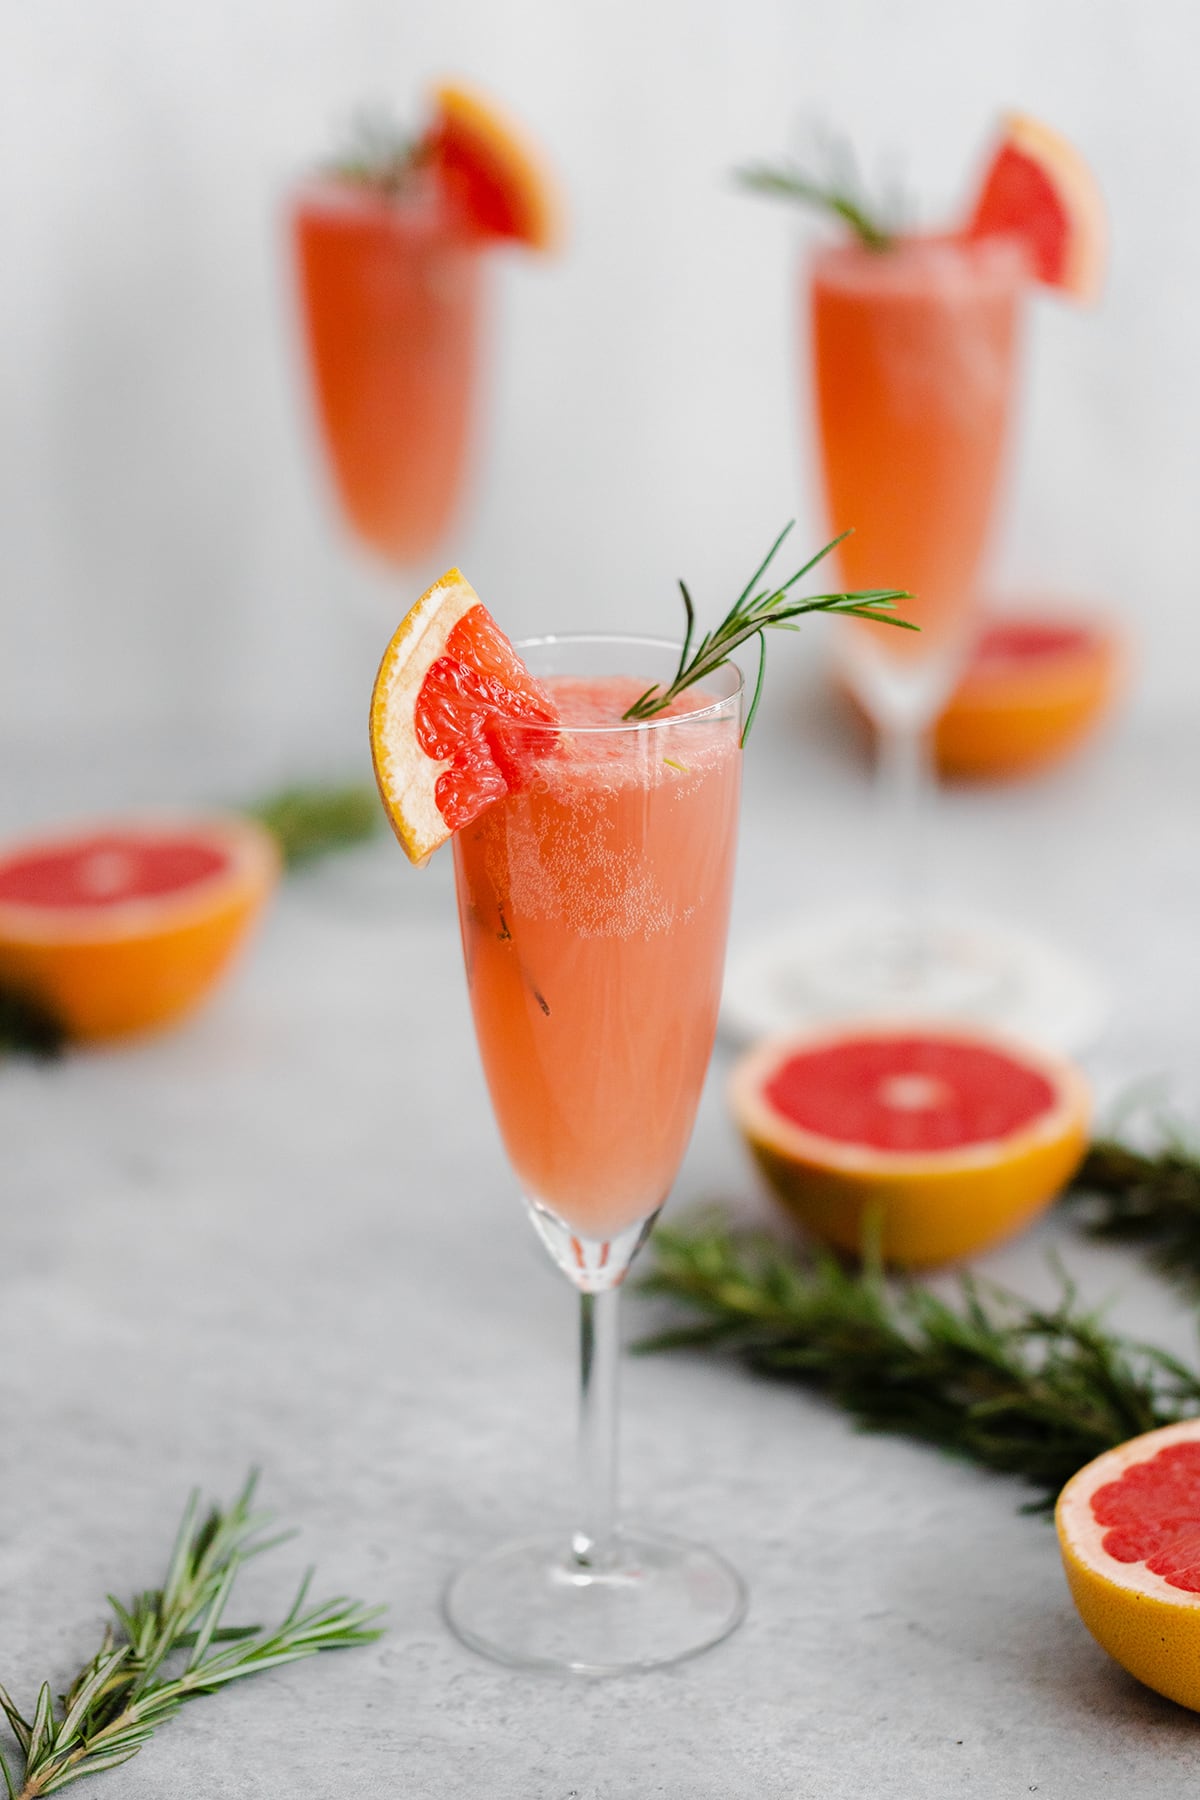 Grapefruit Mimosa in 3 flute glasses garnished with fresh rosemary and a quarter of a slice of grapefruit on the rim. Grapefruits as decoration in the background.